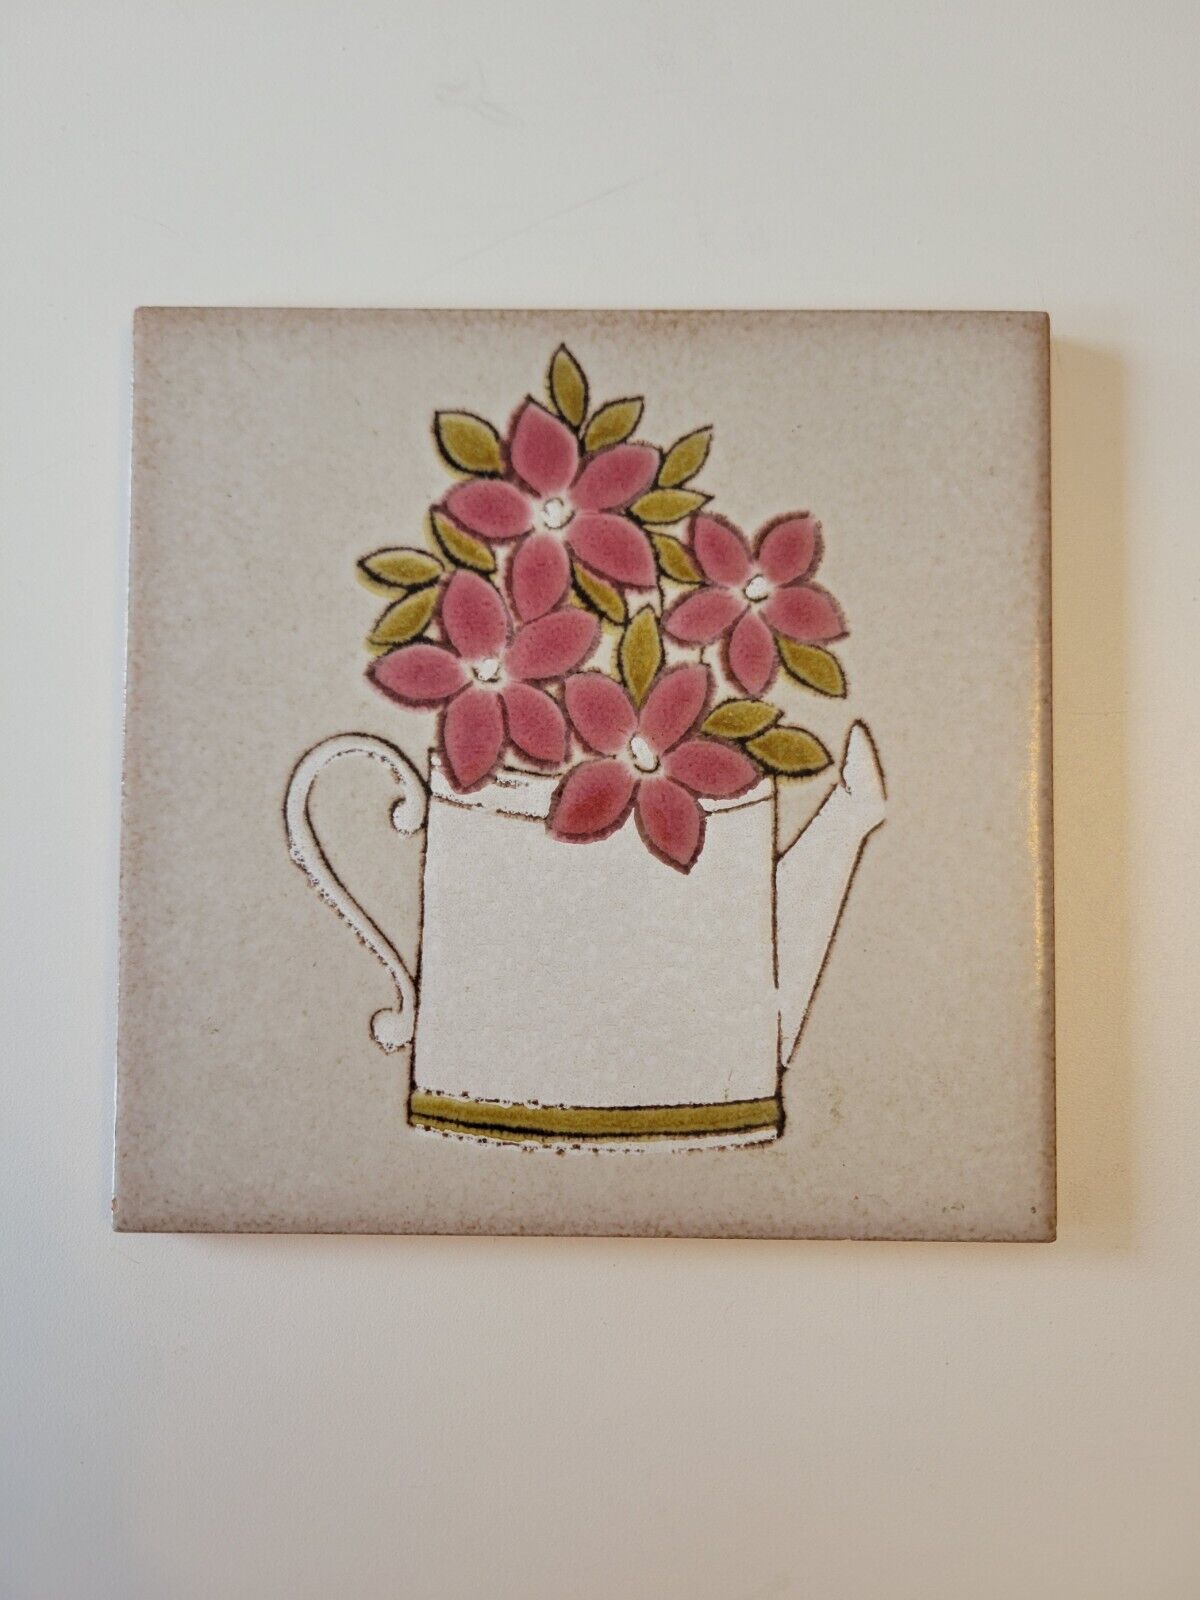 VTG PIEMME Italy Decorative Tile With Picture Of Watering Can And Flowers